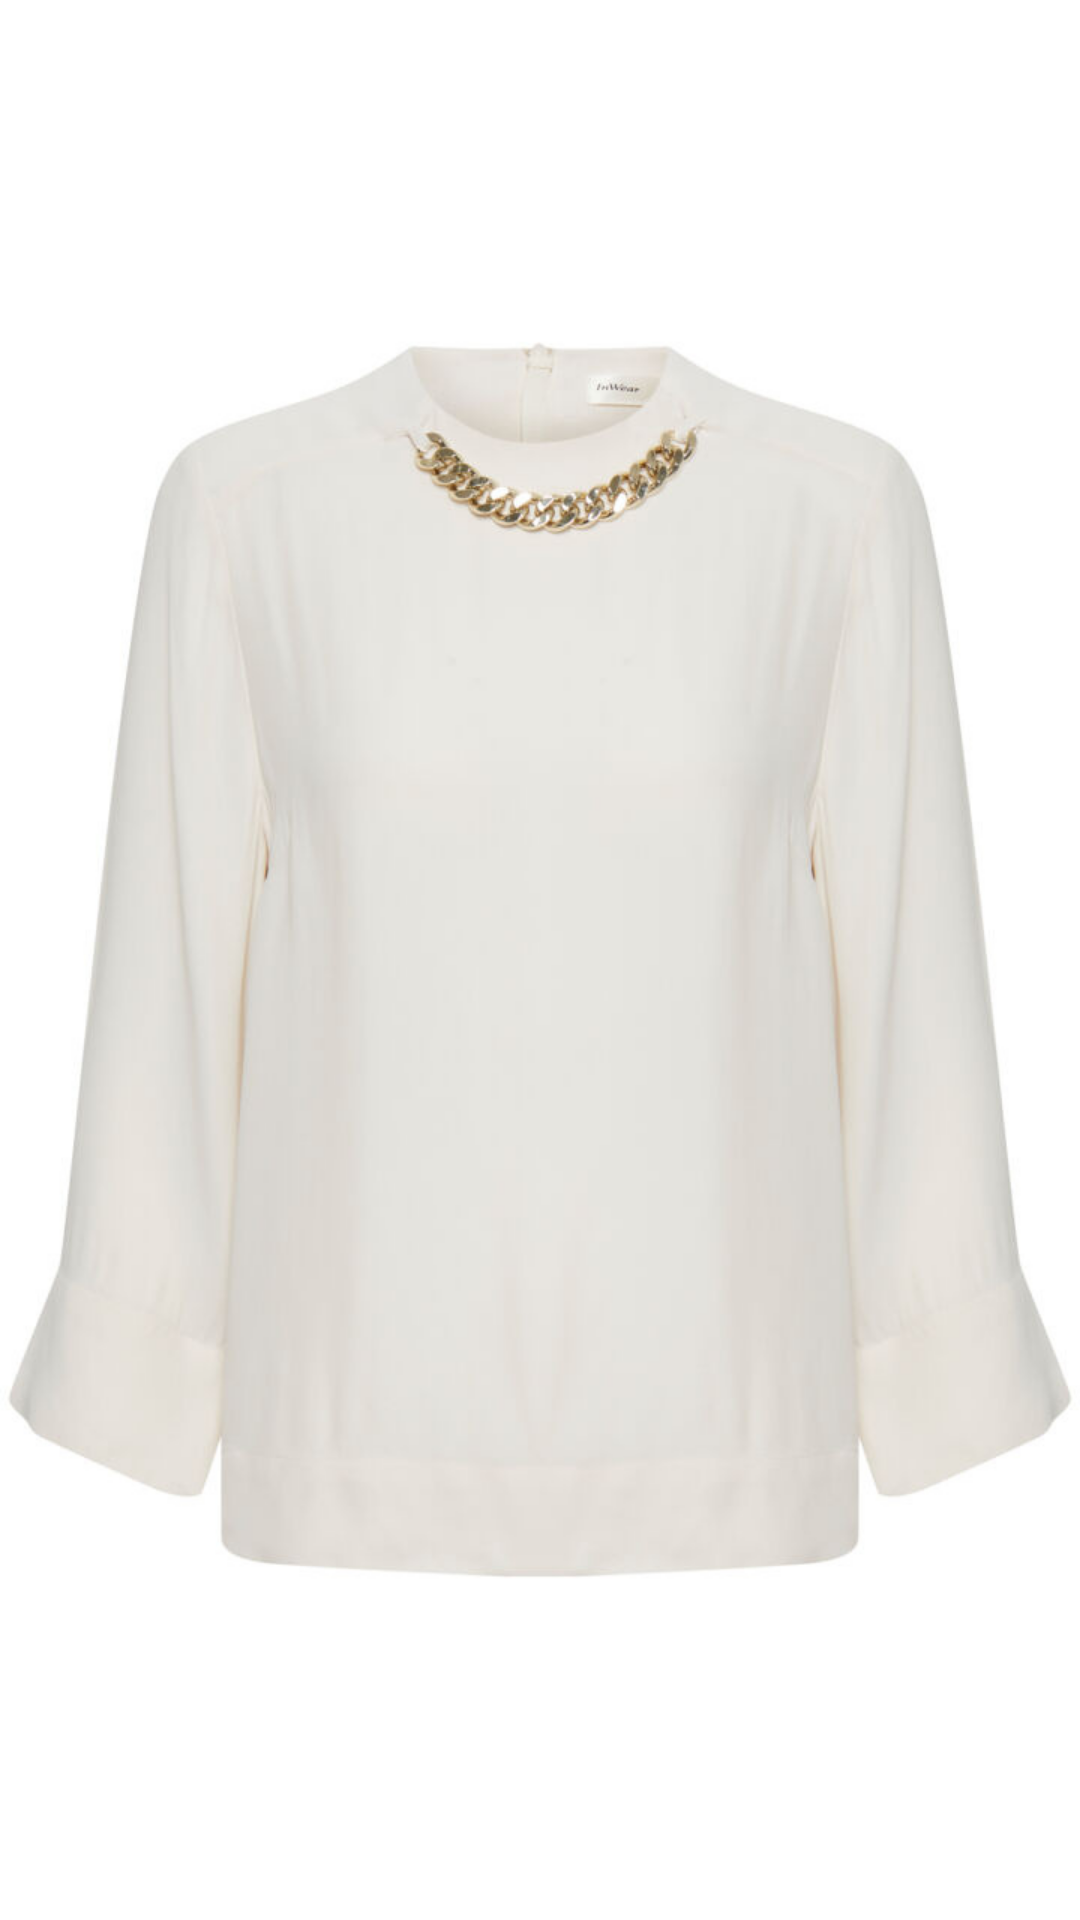 InWear Cream Blouse with Gold Chain - Jezabel Boutique